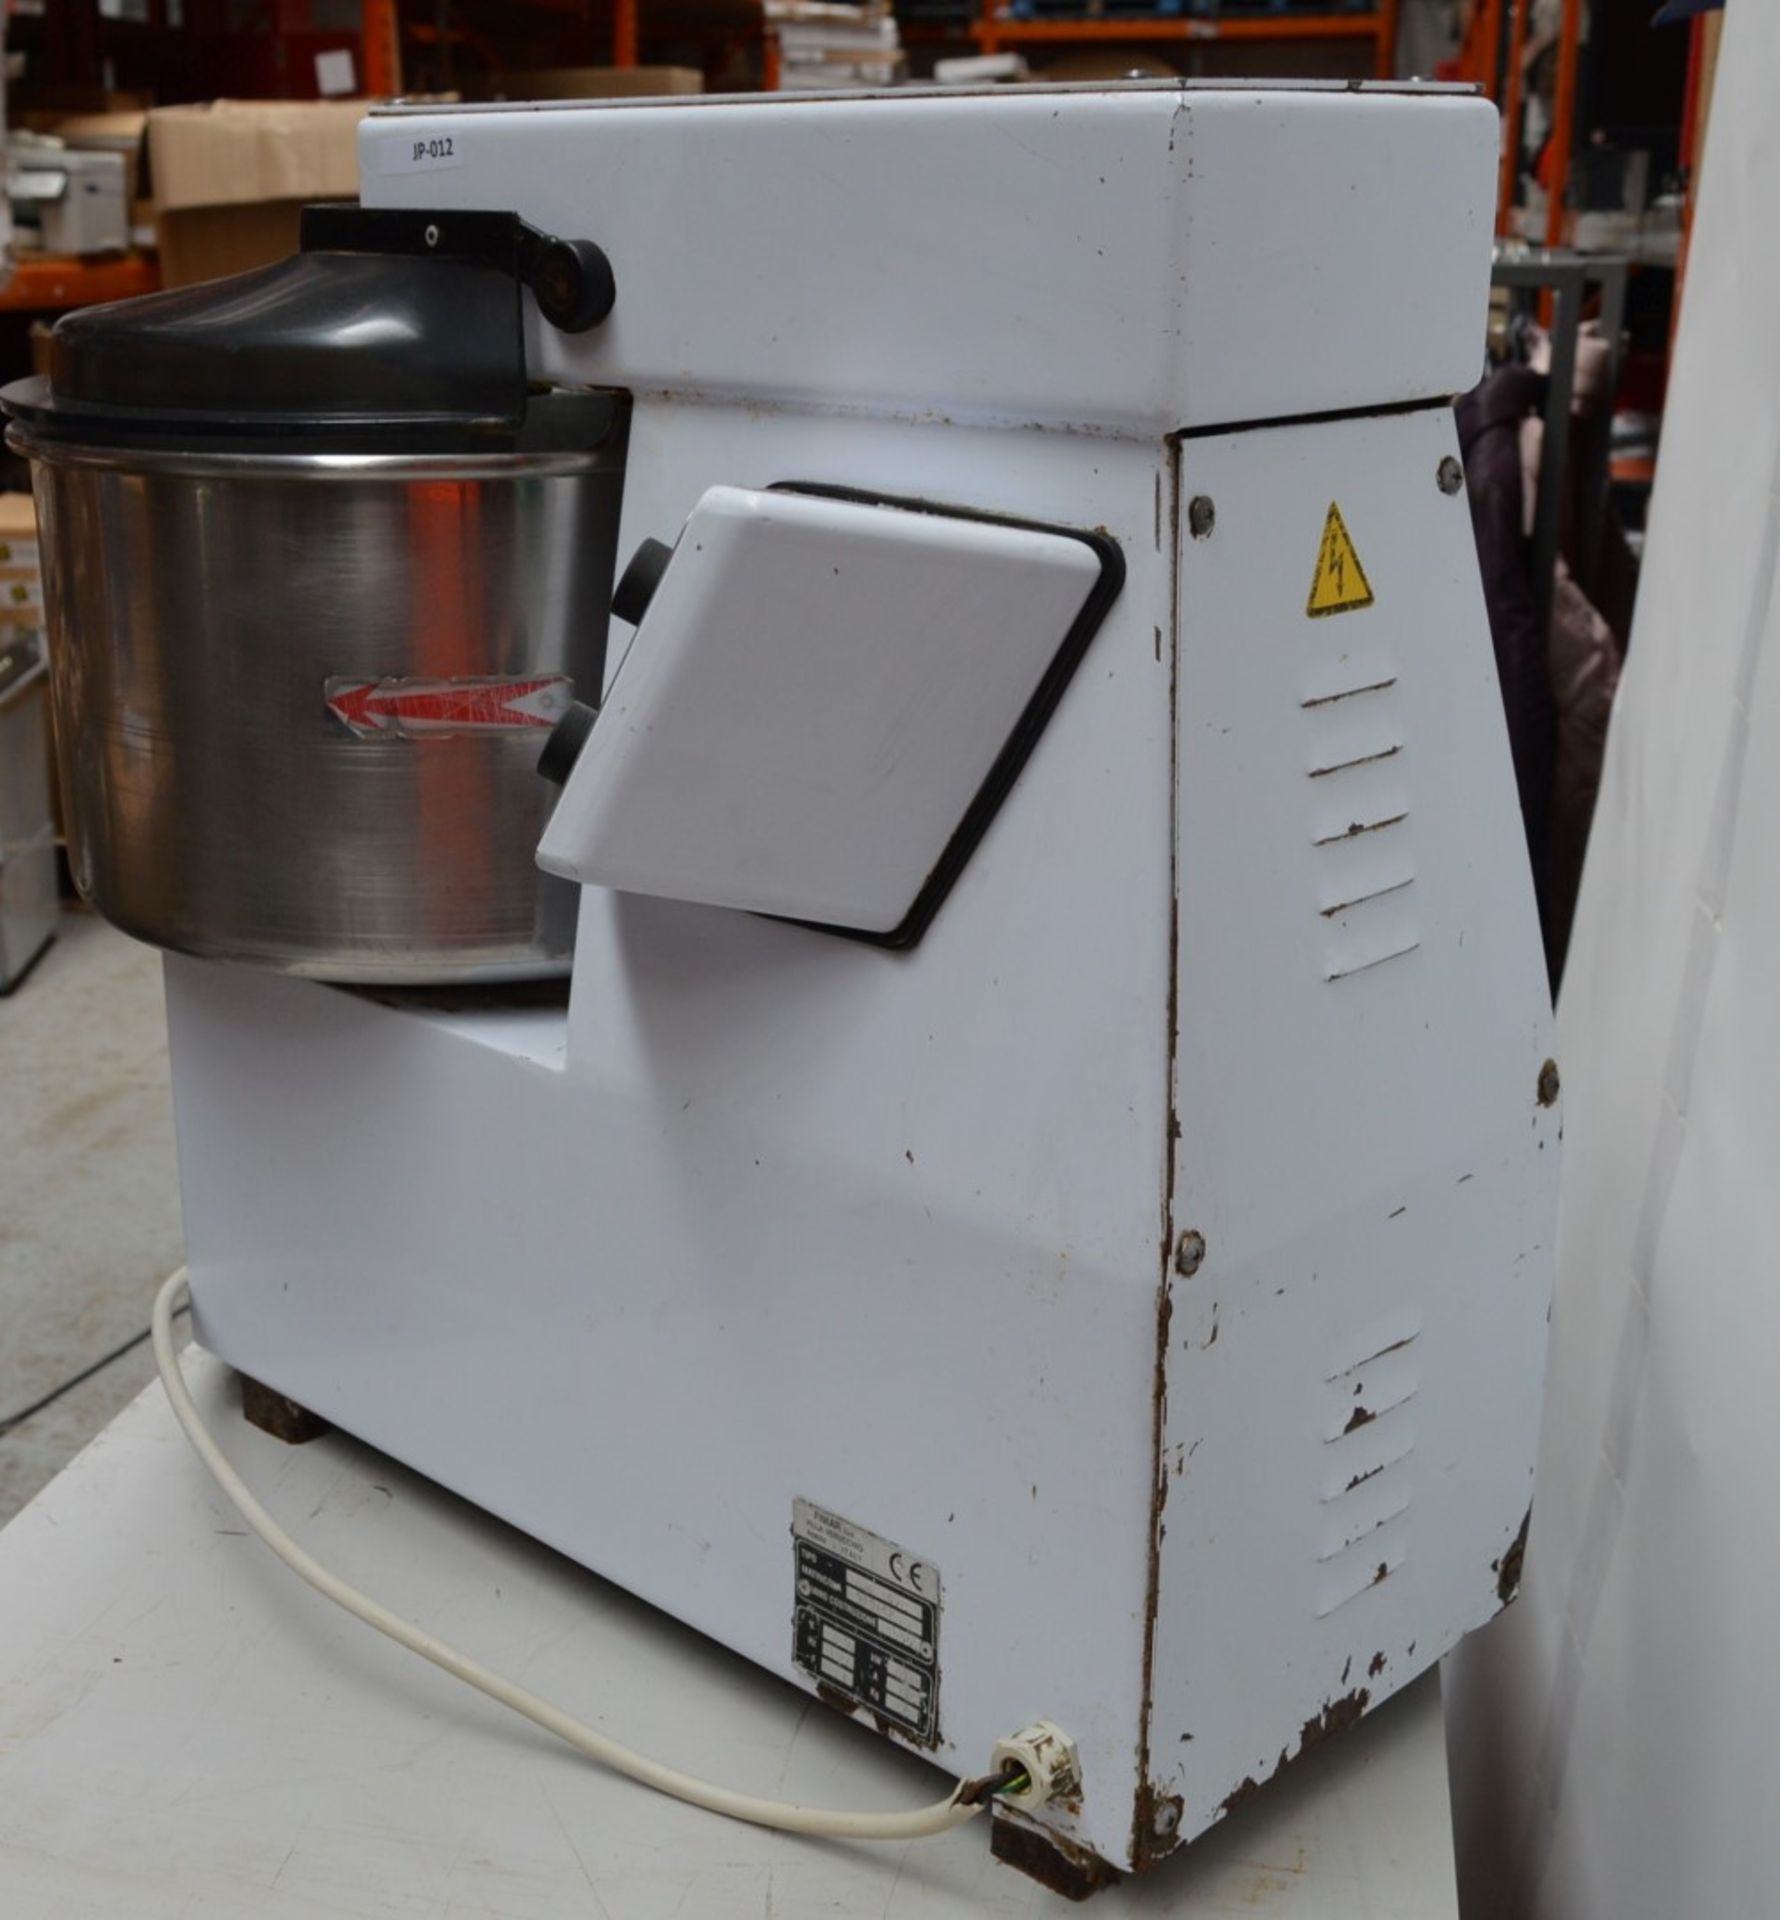 1 x Fimar Spiral Hook Dough Mixer - Type 1MP 16/S - Made in Italy - Heavy Duty Construction - H58 - Image 10 of 10